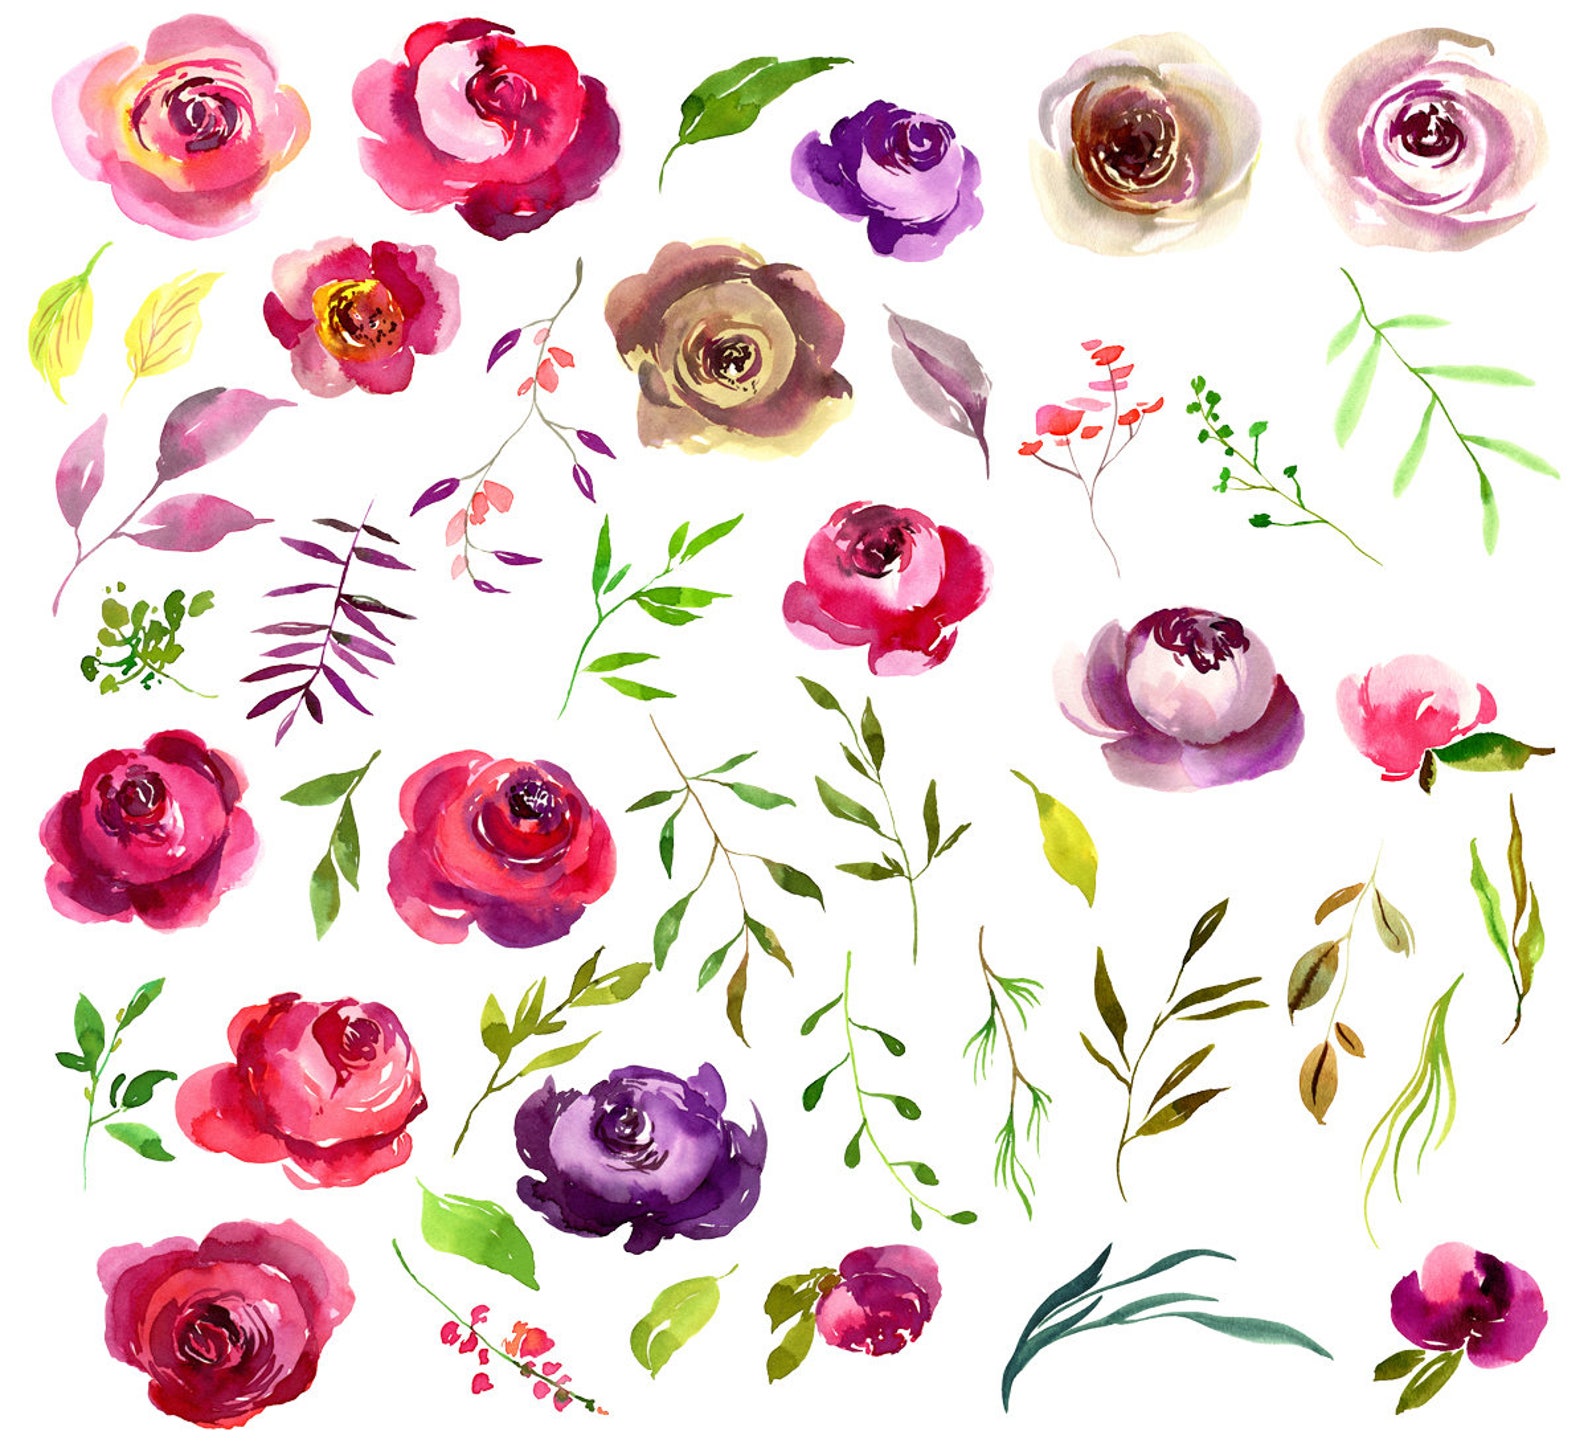 Watercolor Floral Clipart Bright Roses Flowers Branches Leaves - Etsy